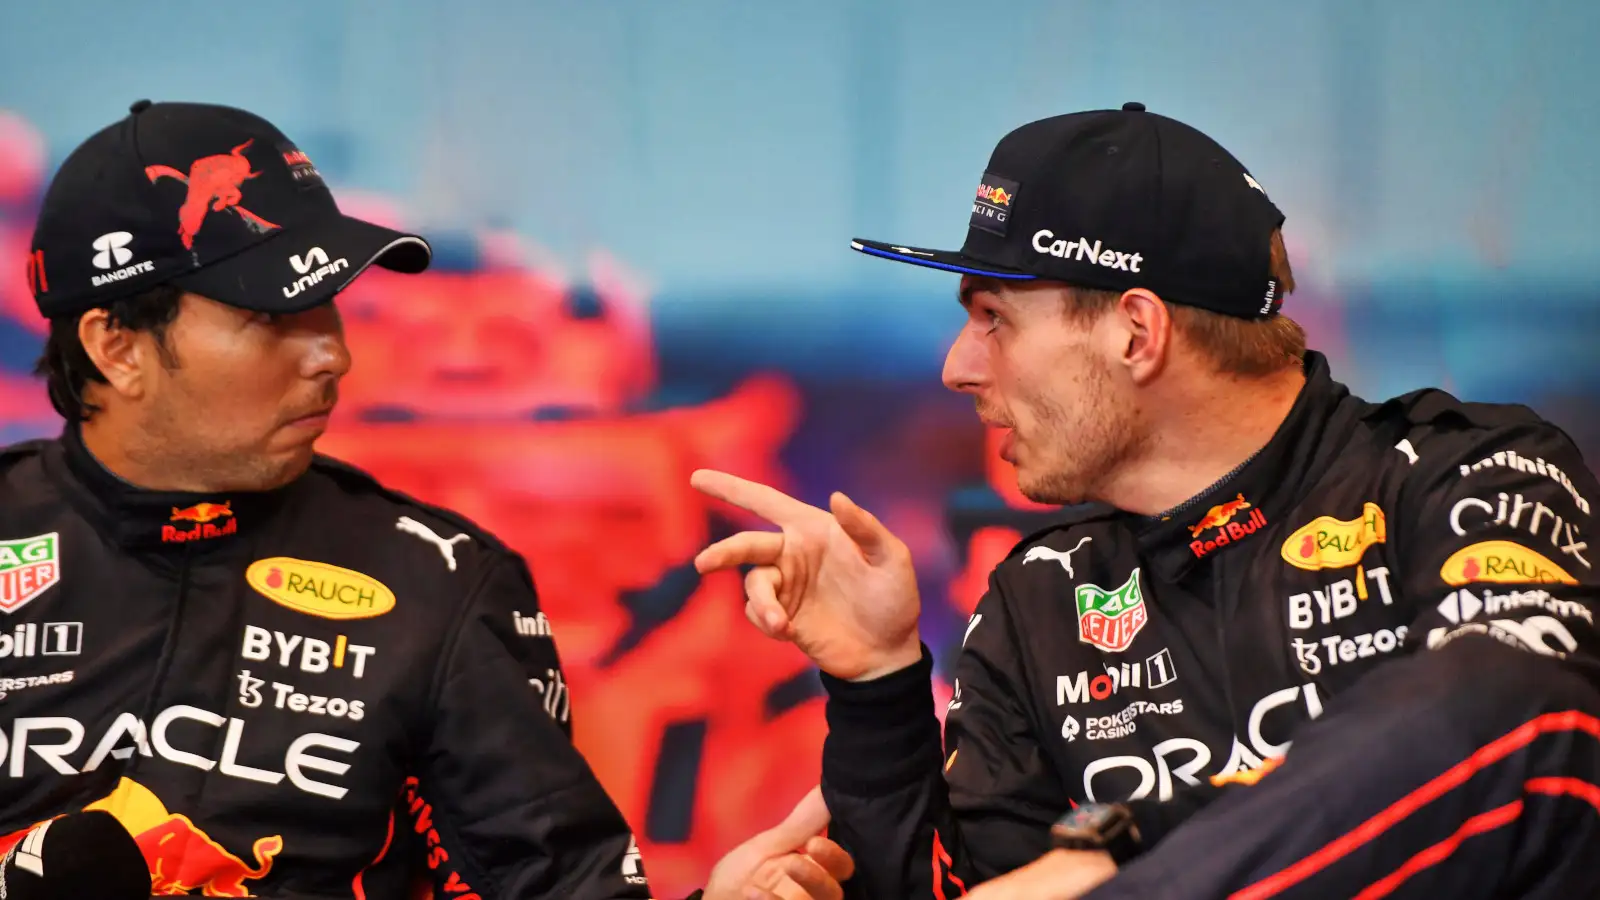 Max Verstappen pointing something out to Sergio Perez in the press conference. Monaco May 2022